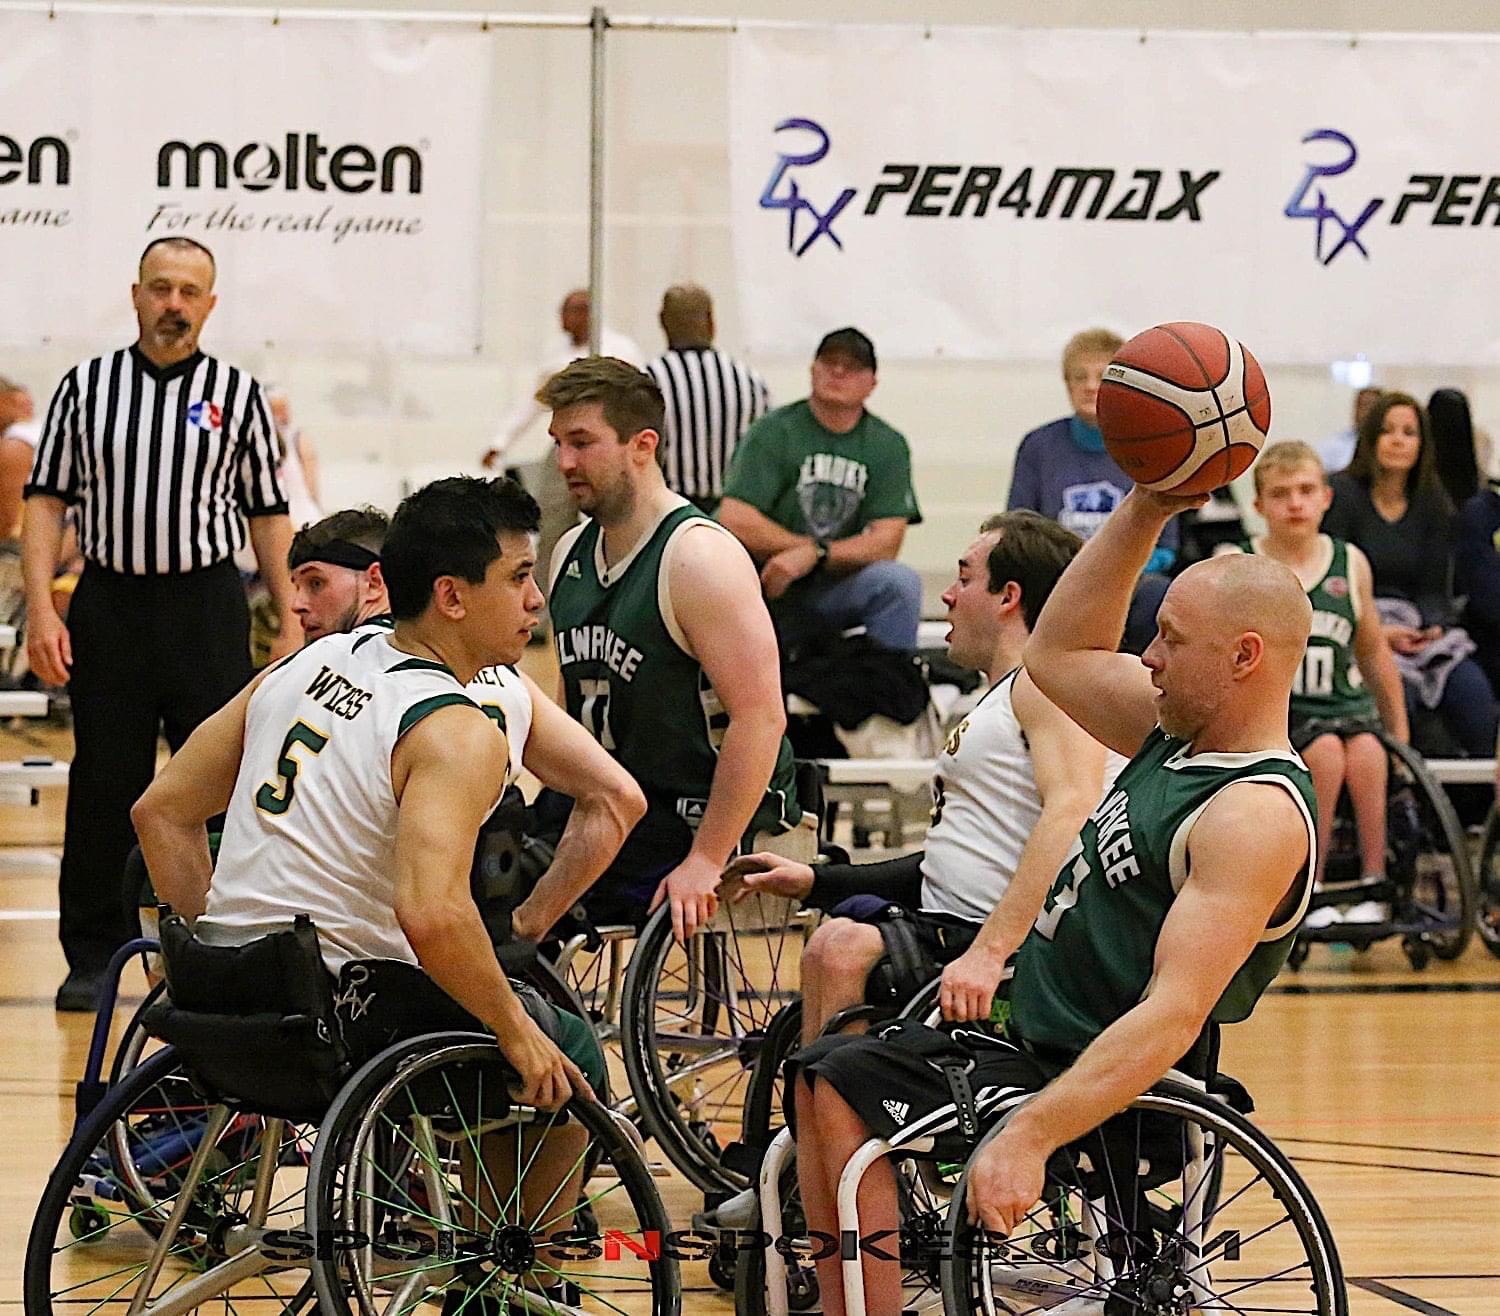 Adaptive sports: Group of teens wearing cleeveless team tank t-shirts in wheeldhairs on indoor basketball court packed tightly together trying to get the ball from one another